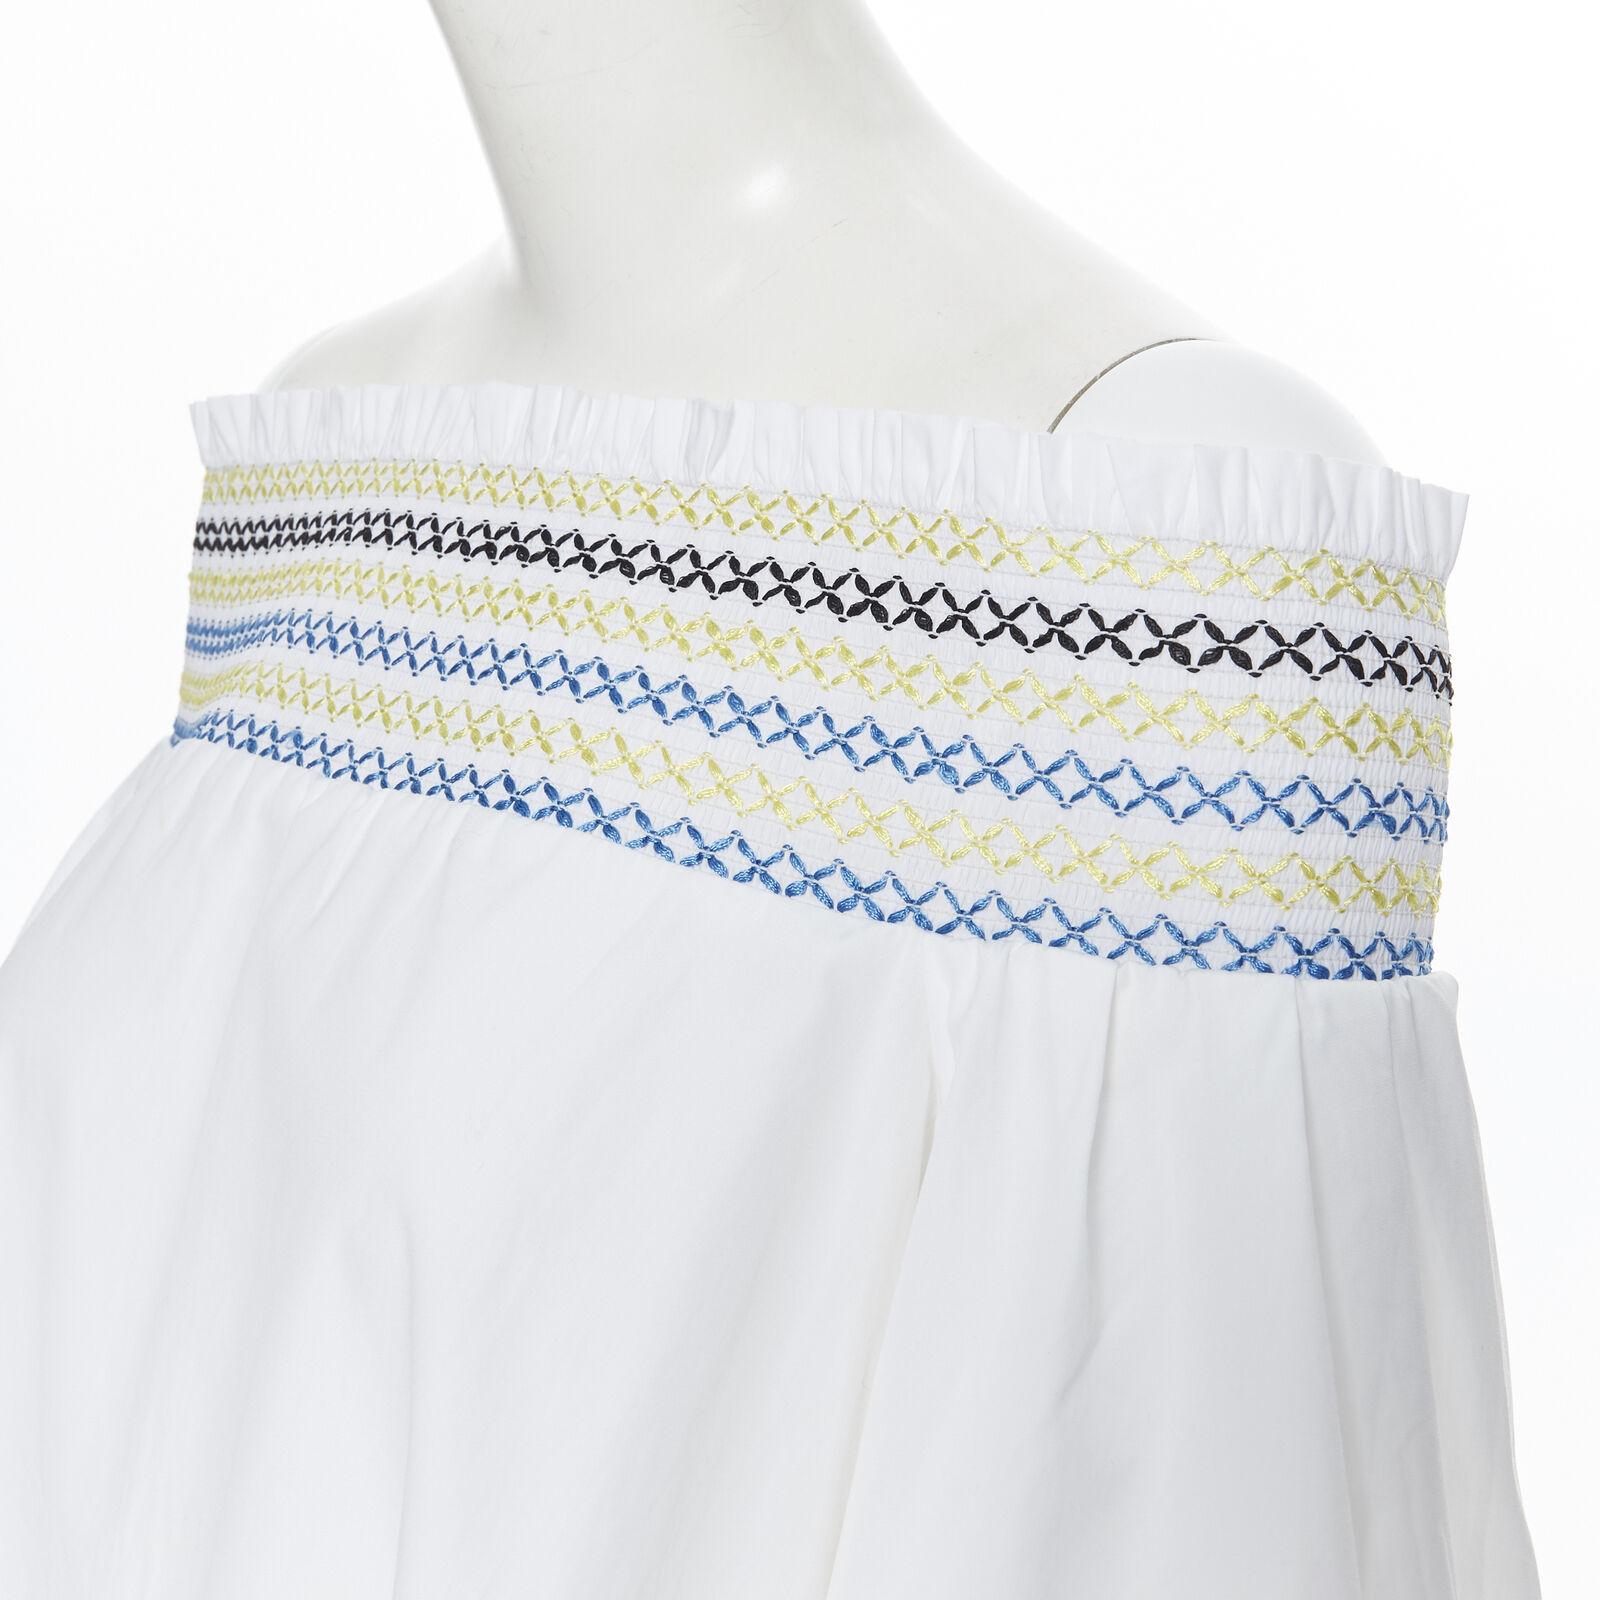 PETER PILOTTO white cotton ethnic embroidery off shoulder puff sleeve top UK6
Reference: SNKO/A00115
Brand: Peter Pilotto
Material: Cotton
Color: White
Pattern: Solid
Extra Details: 100% cotton. Yellow, blue and black embroidery. Rusched elasticated